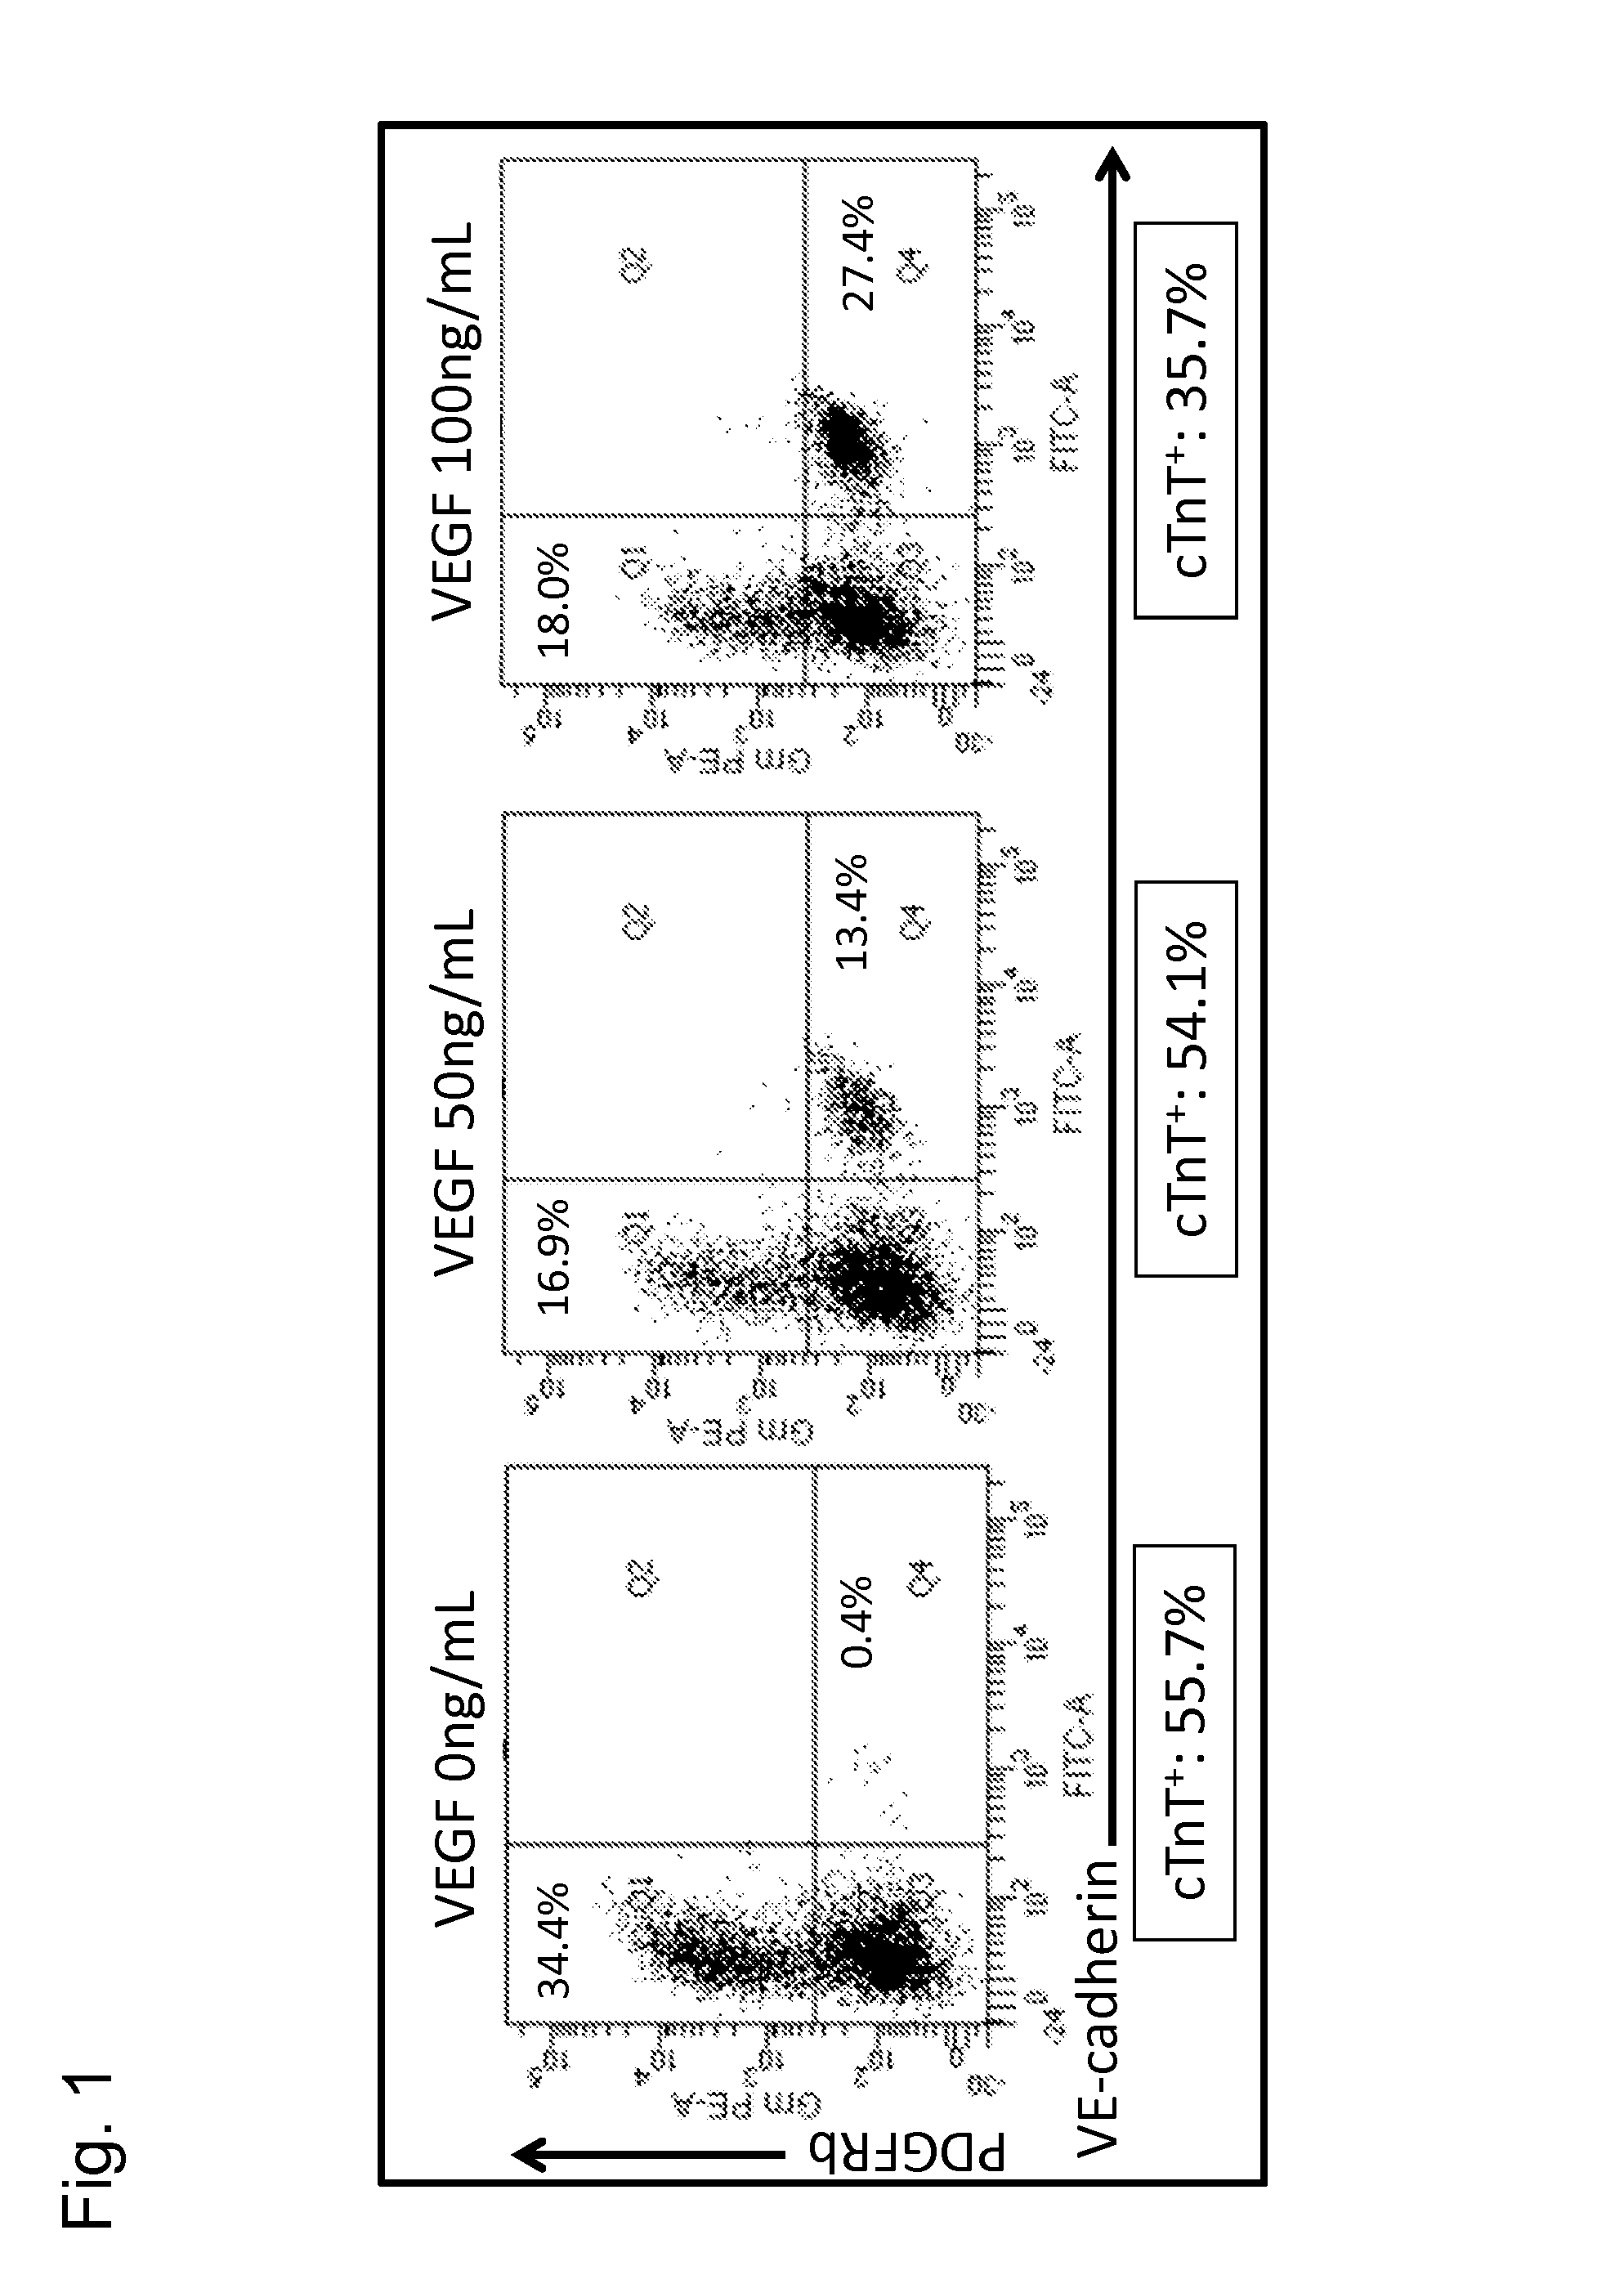 Method for producing mixed cell population of cardiomyocytes and vascular cells from induced pluripotent stem cell